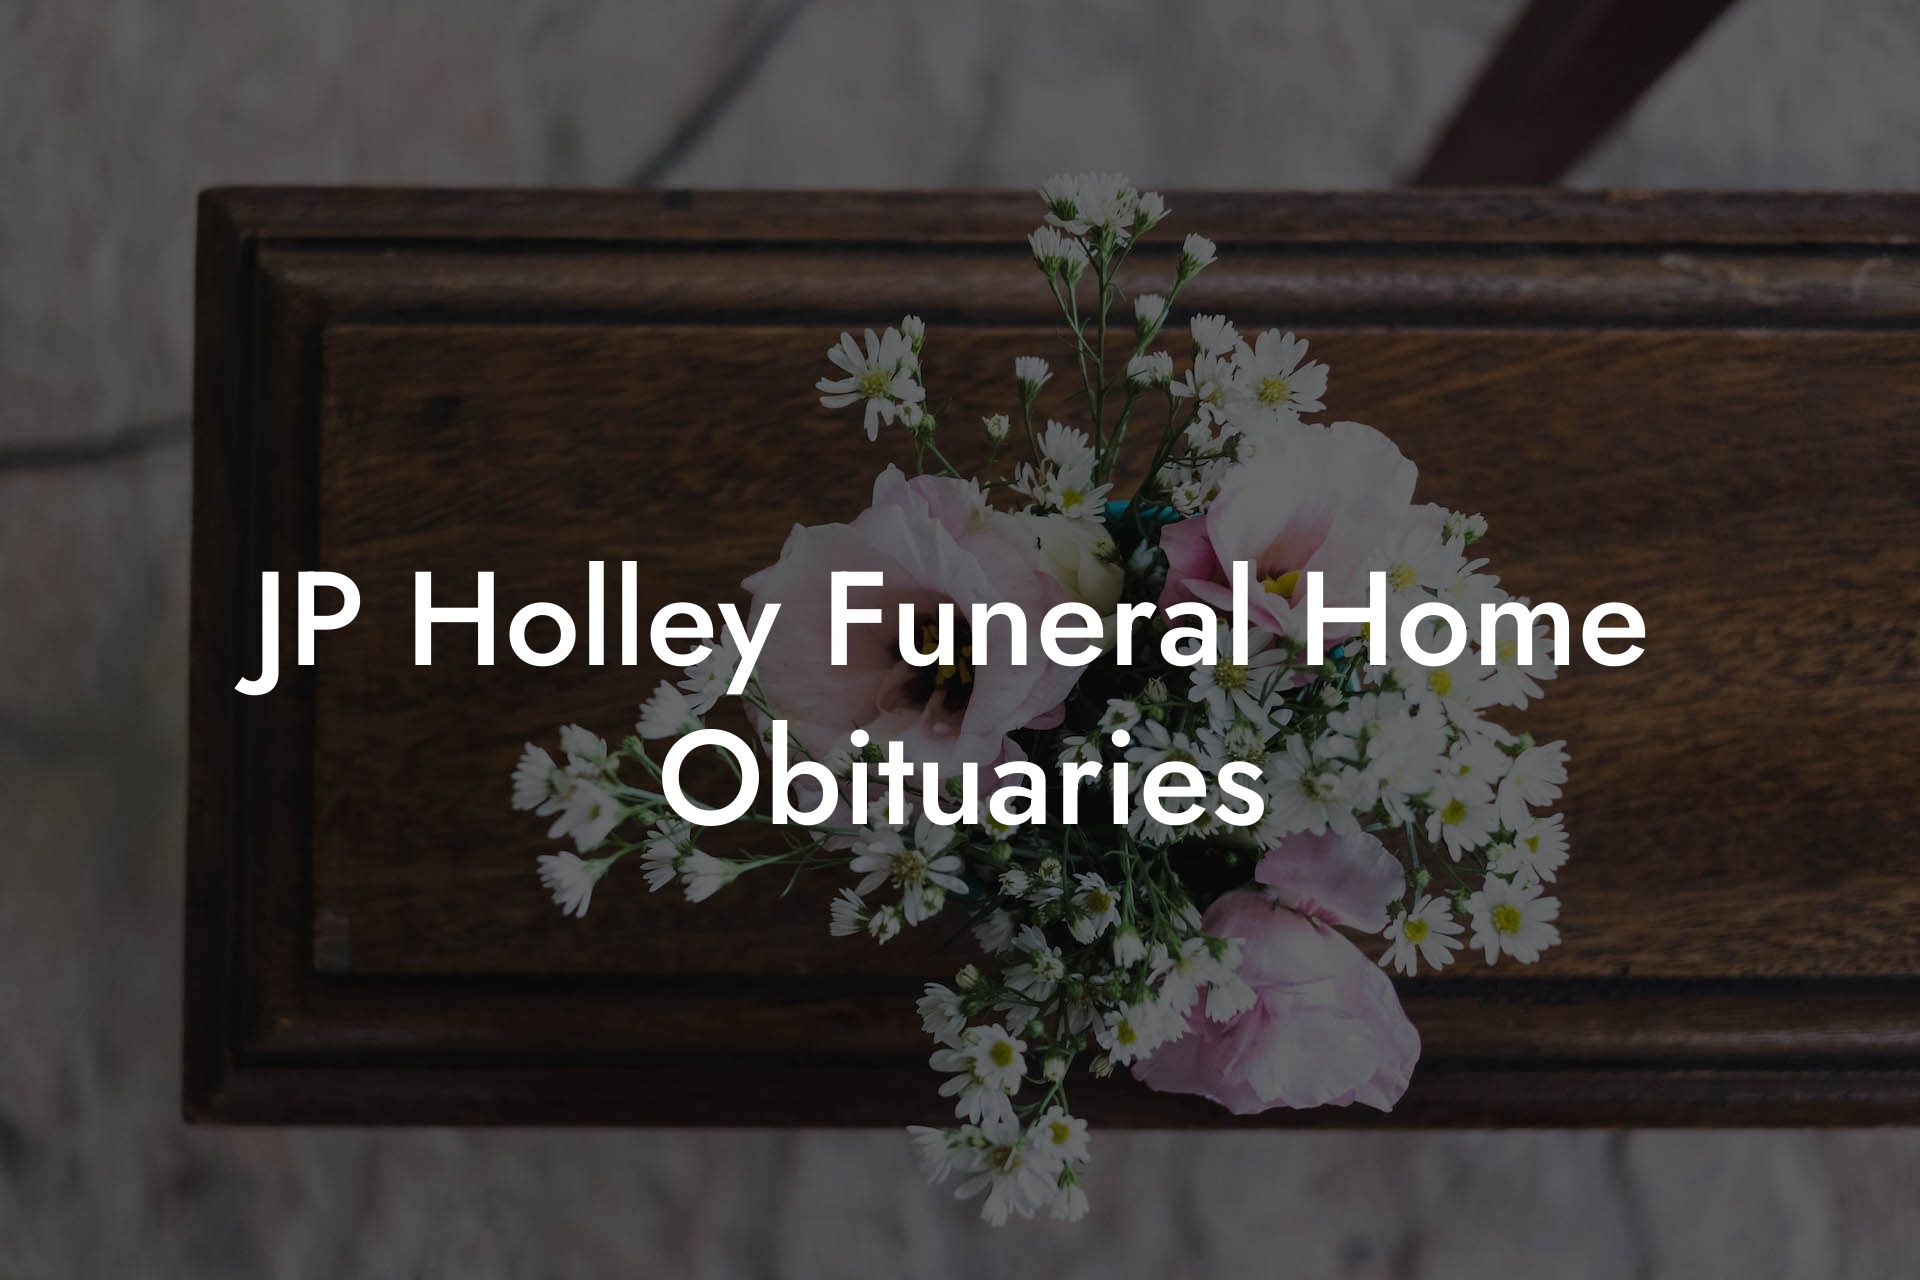 JP Holley Funeral Home Obituaries